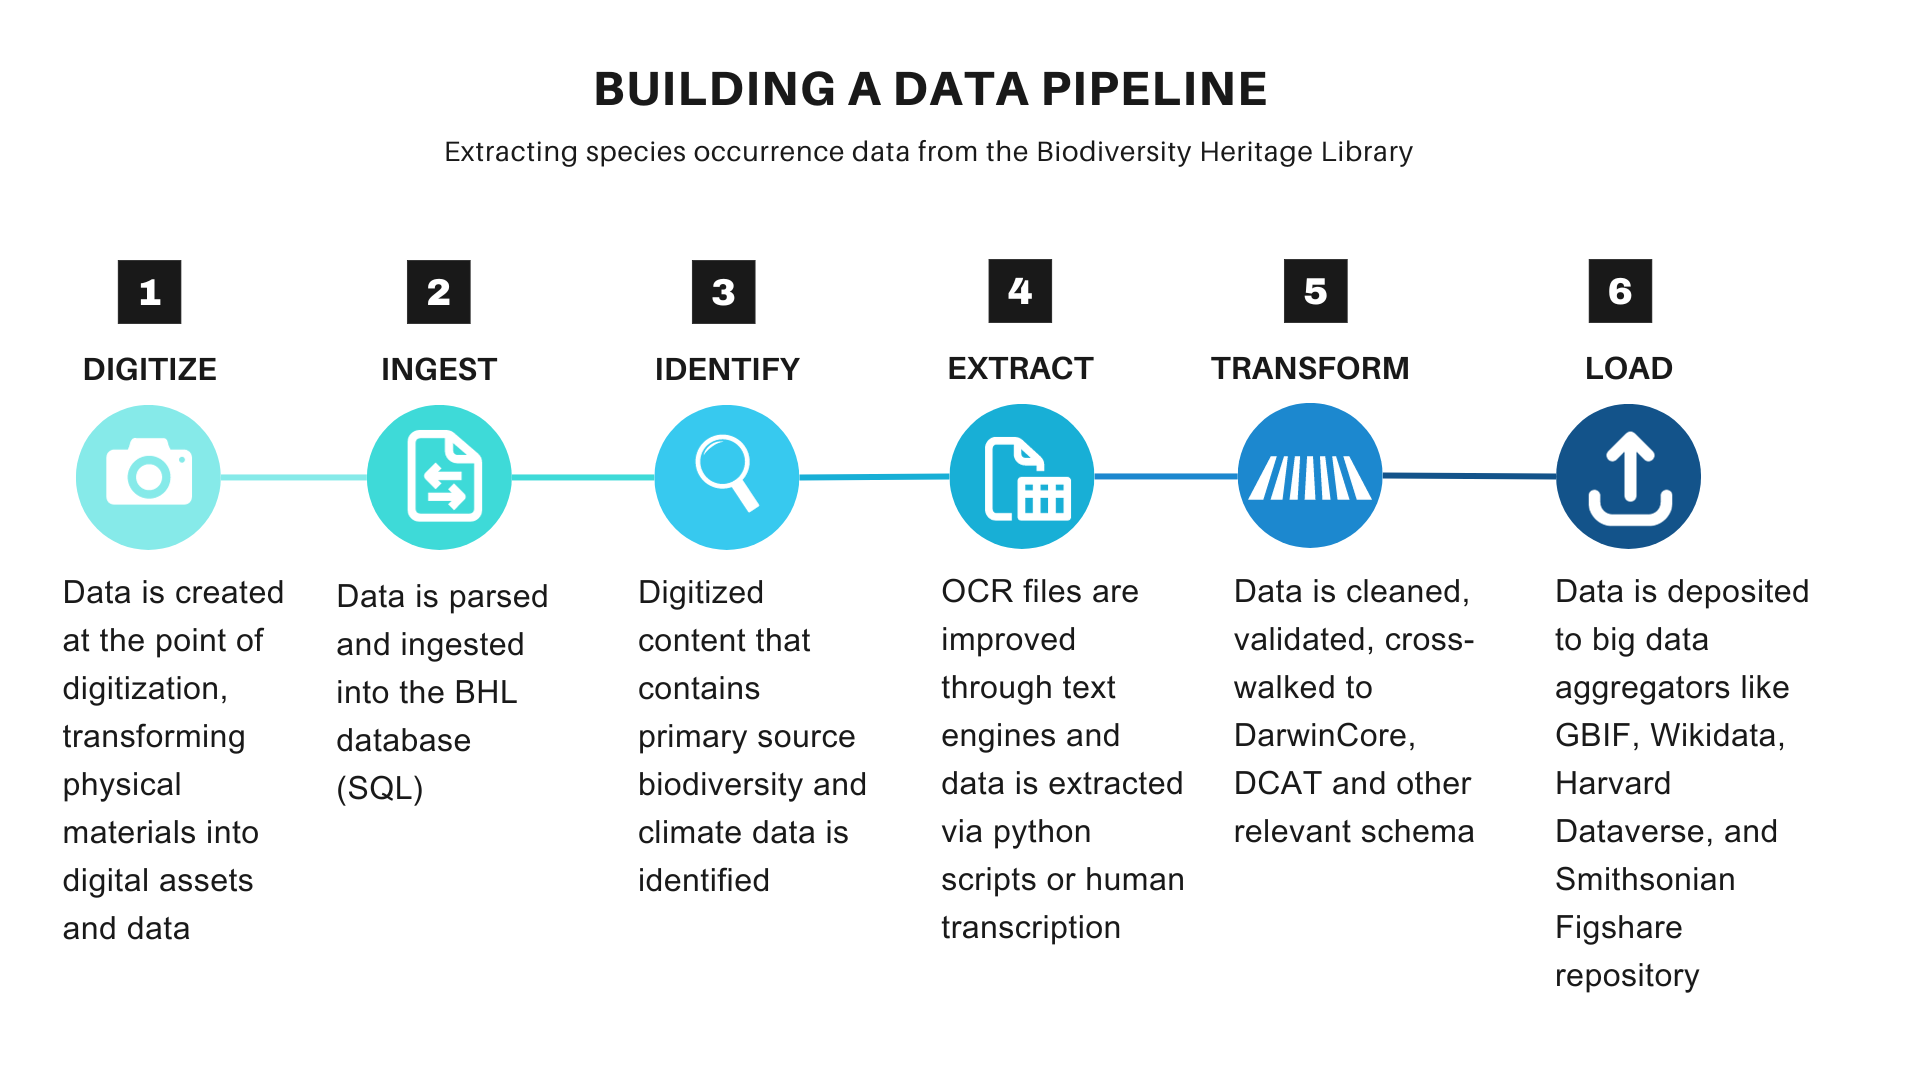 Building a data pipeline: extracting species occurrence data from BHL. 6 steps include: digitize, ingest, identify, extract, transform, and load.